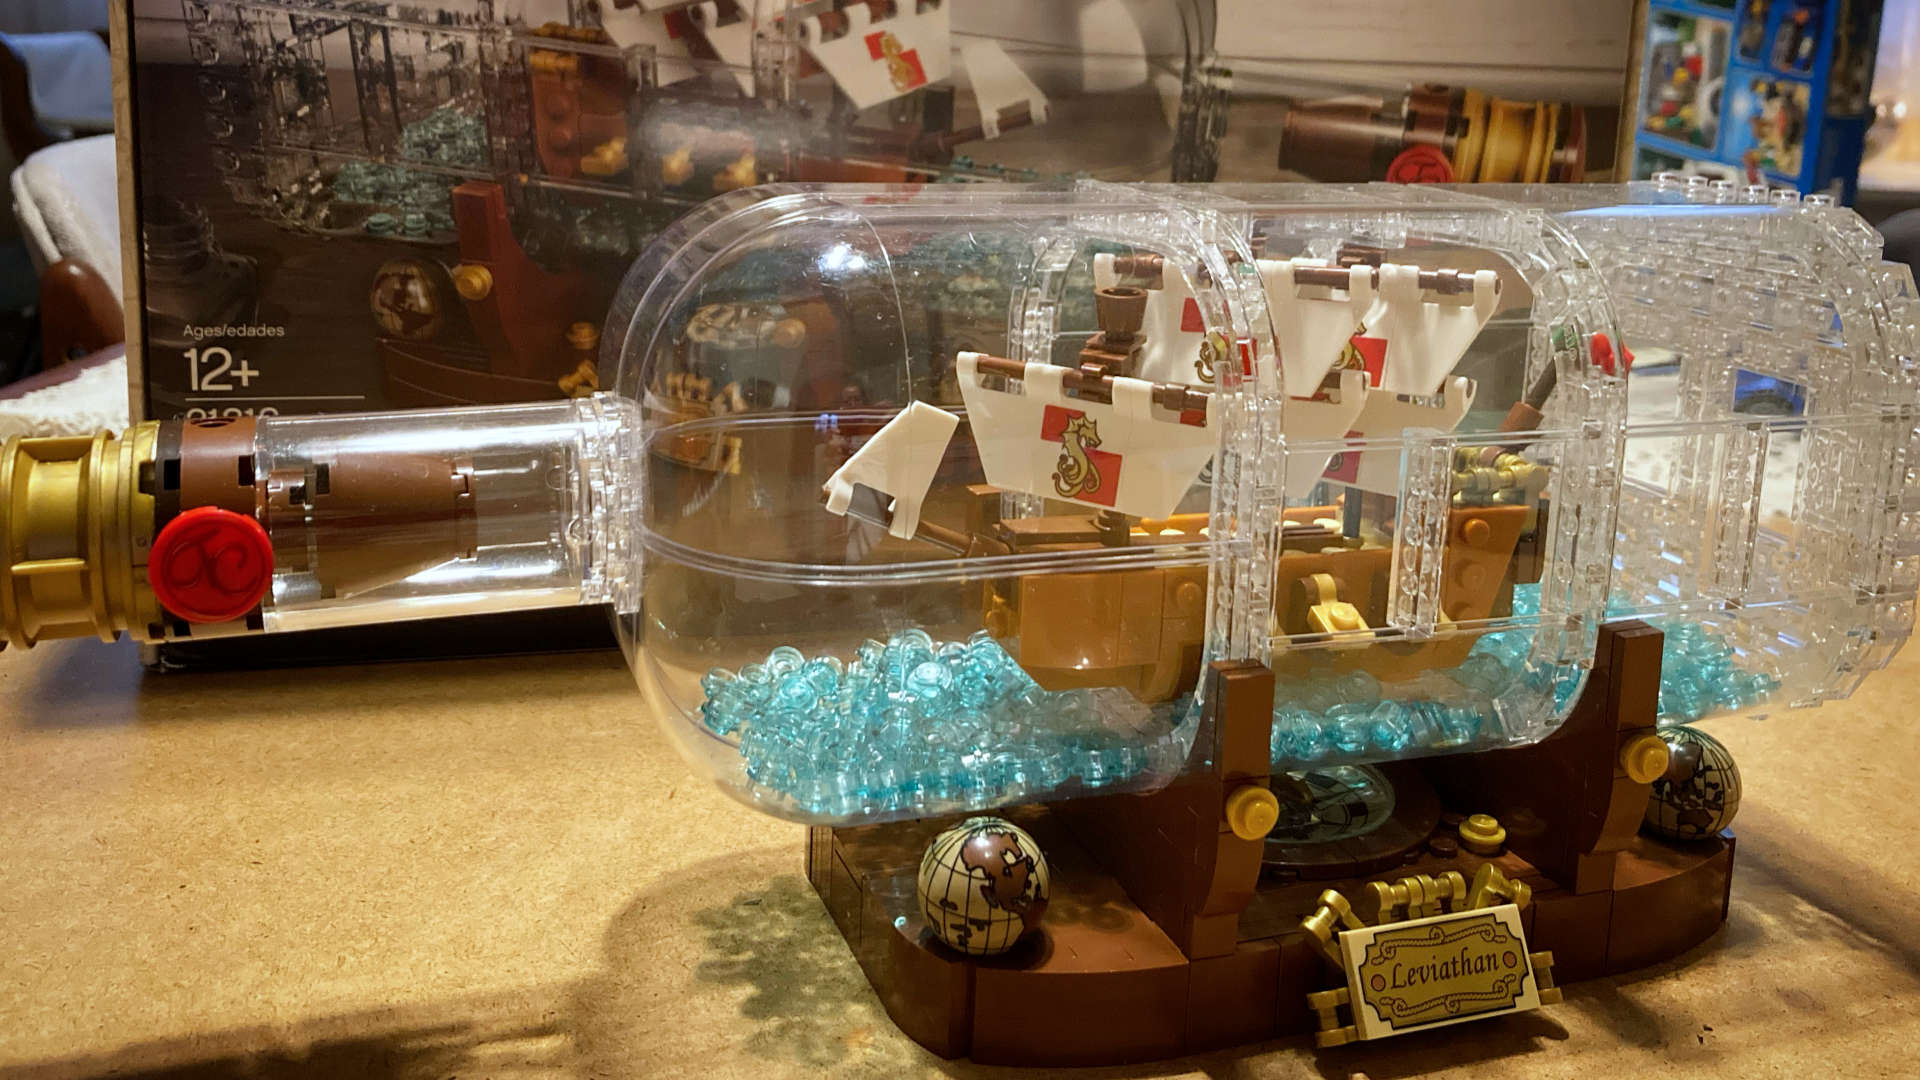 Building Lego's ship in a bottle was a way to destress after filing our taxes!